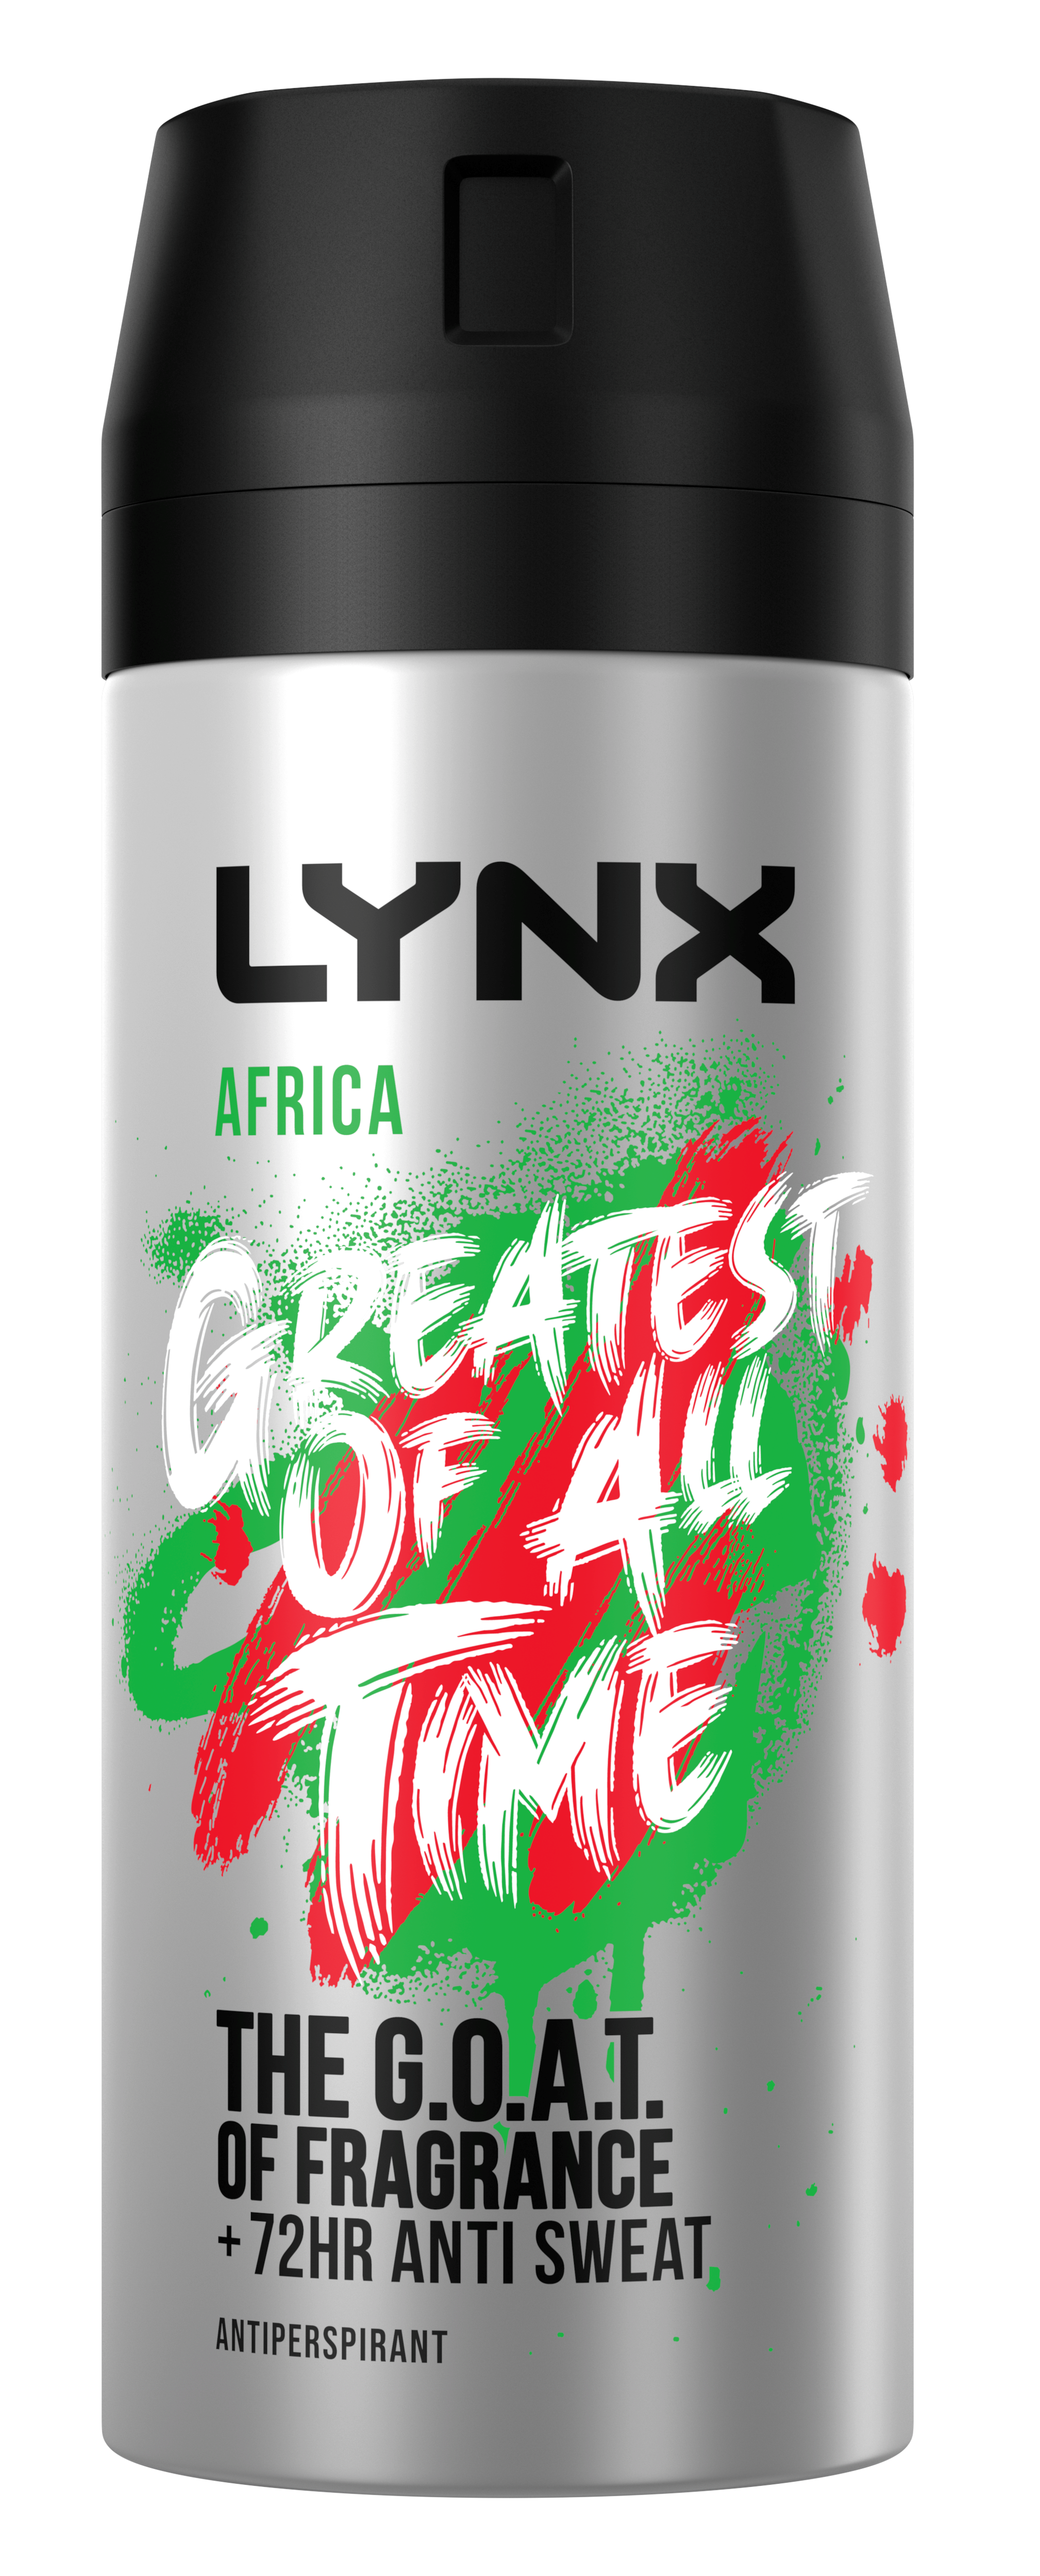 Lynx launches new £13M campaign for Lynx Africa